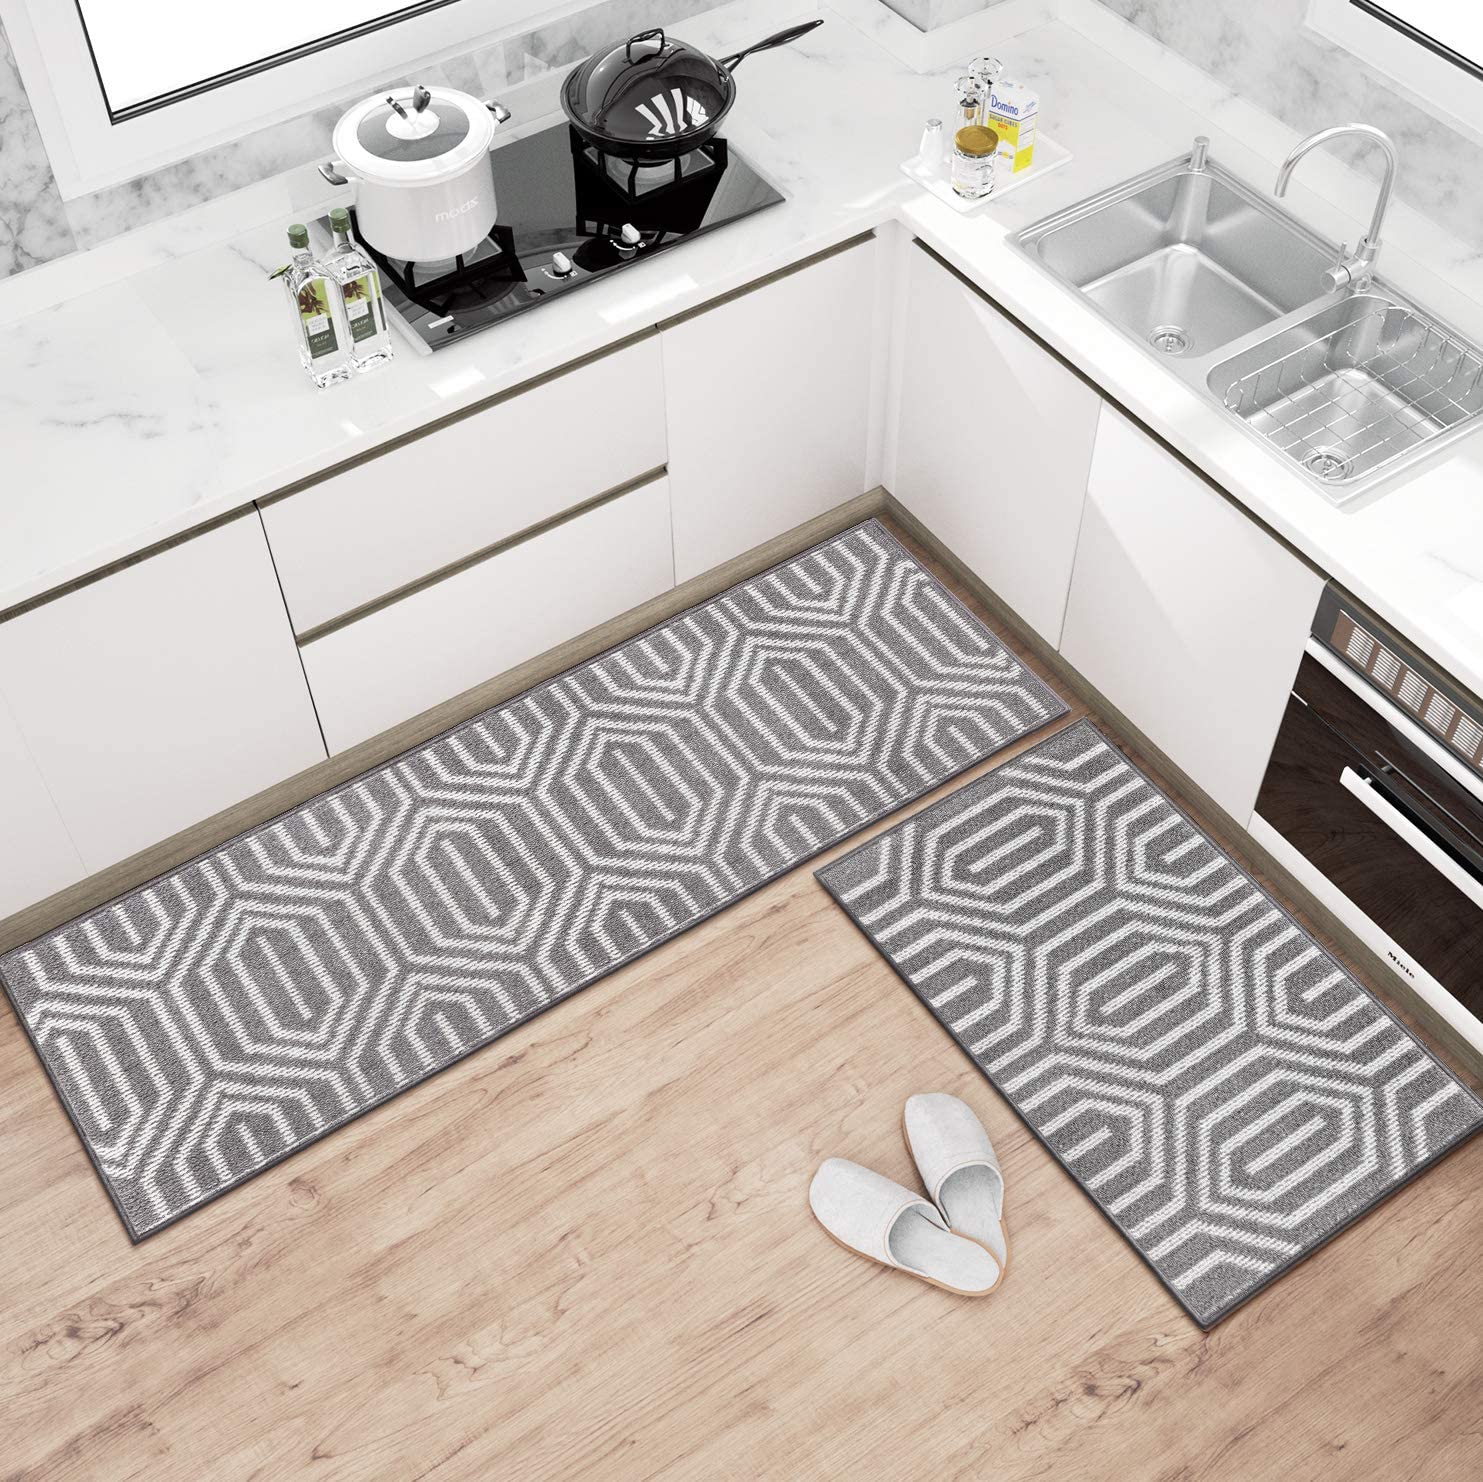 How To Choose The Perfect Kitchen Rug, What Is The Best Type Of Rug For A Kitchen